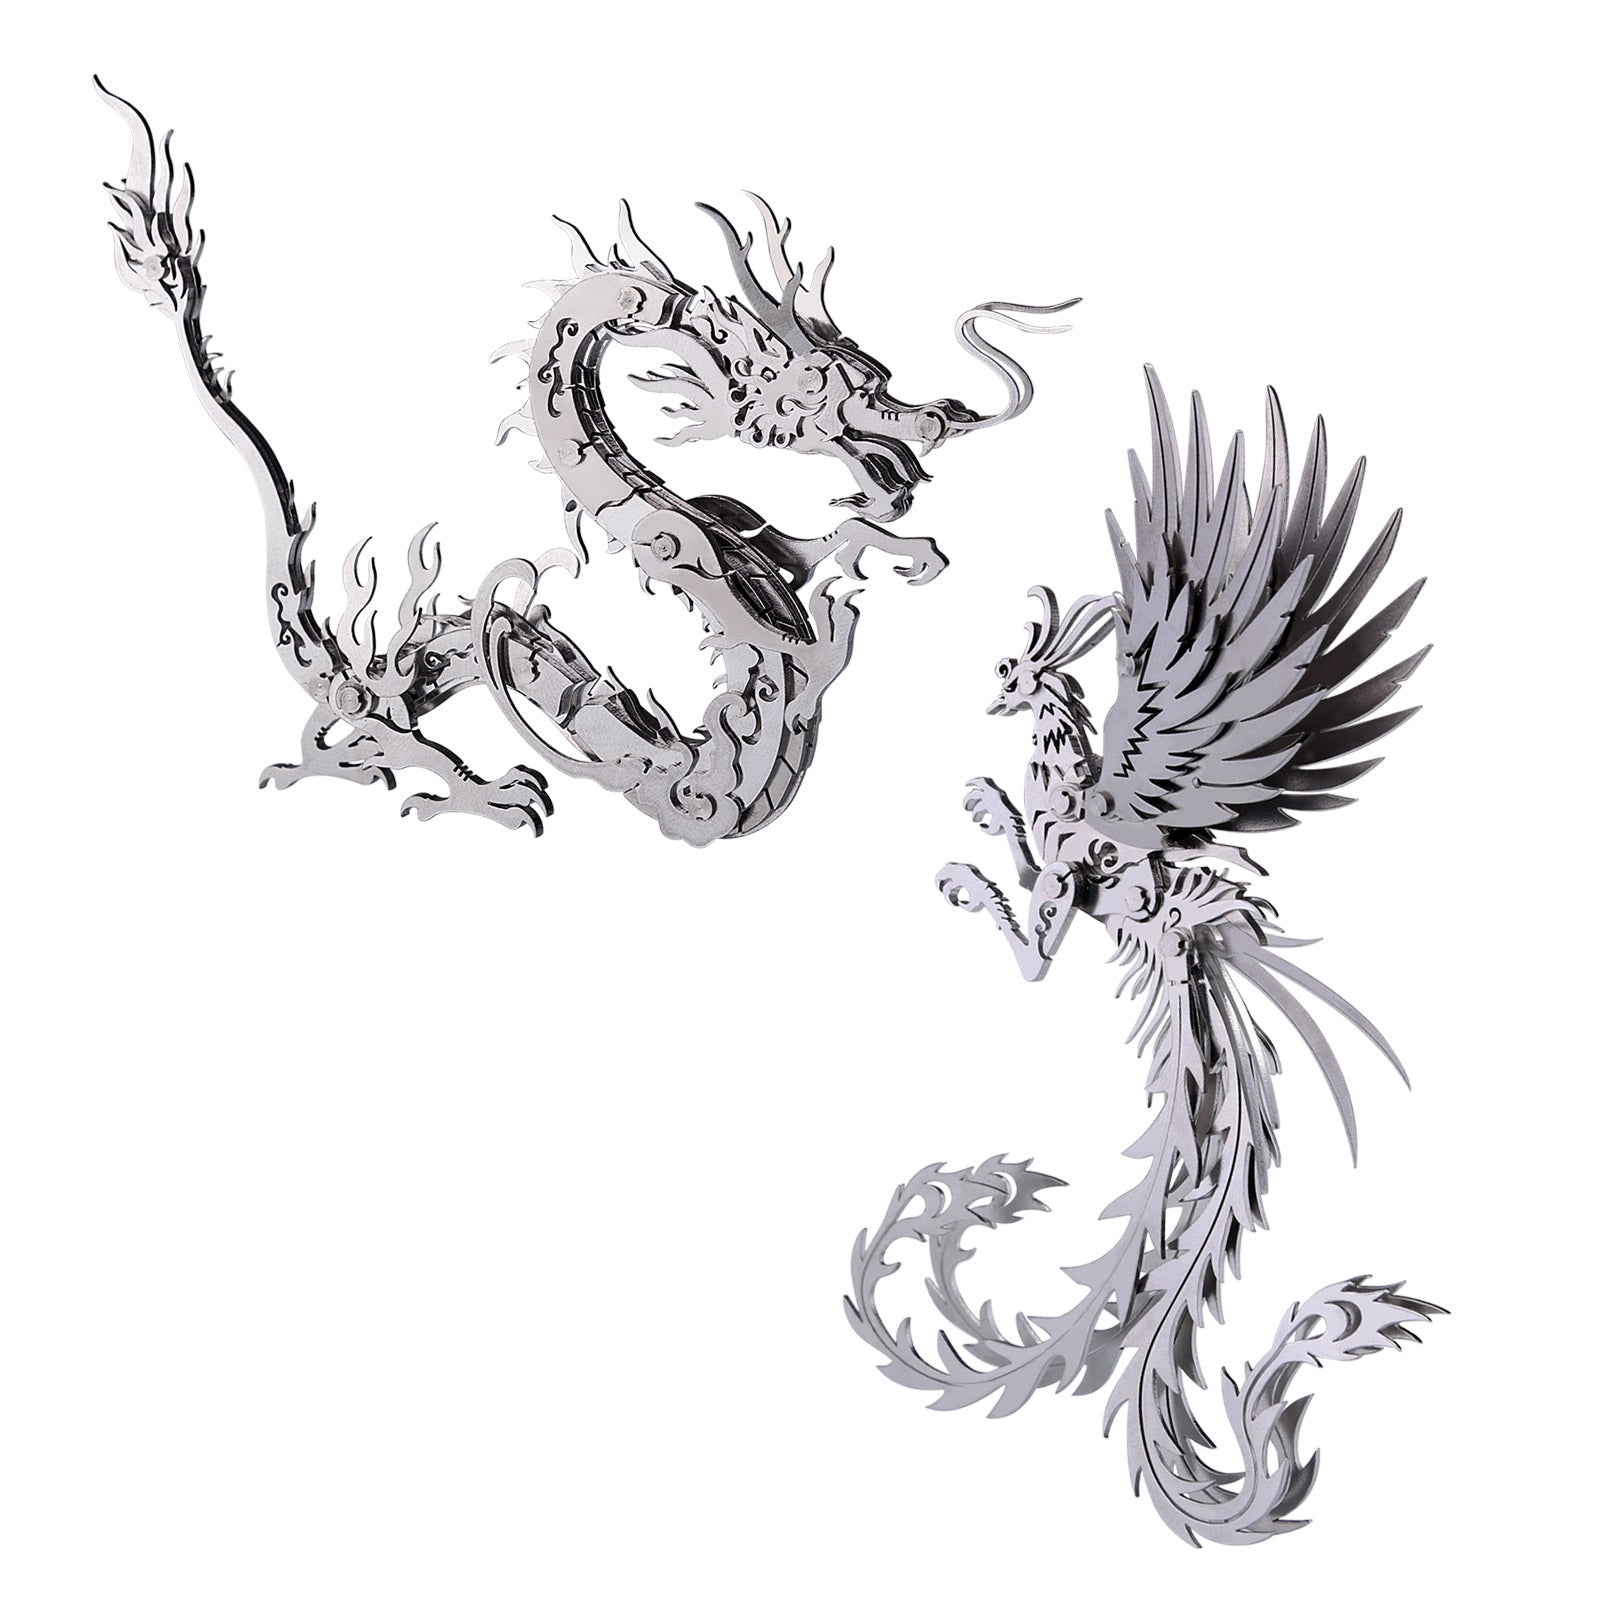 Stunning 3d Illustration Featuring A White Oriental Dragon